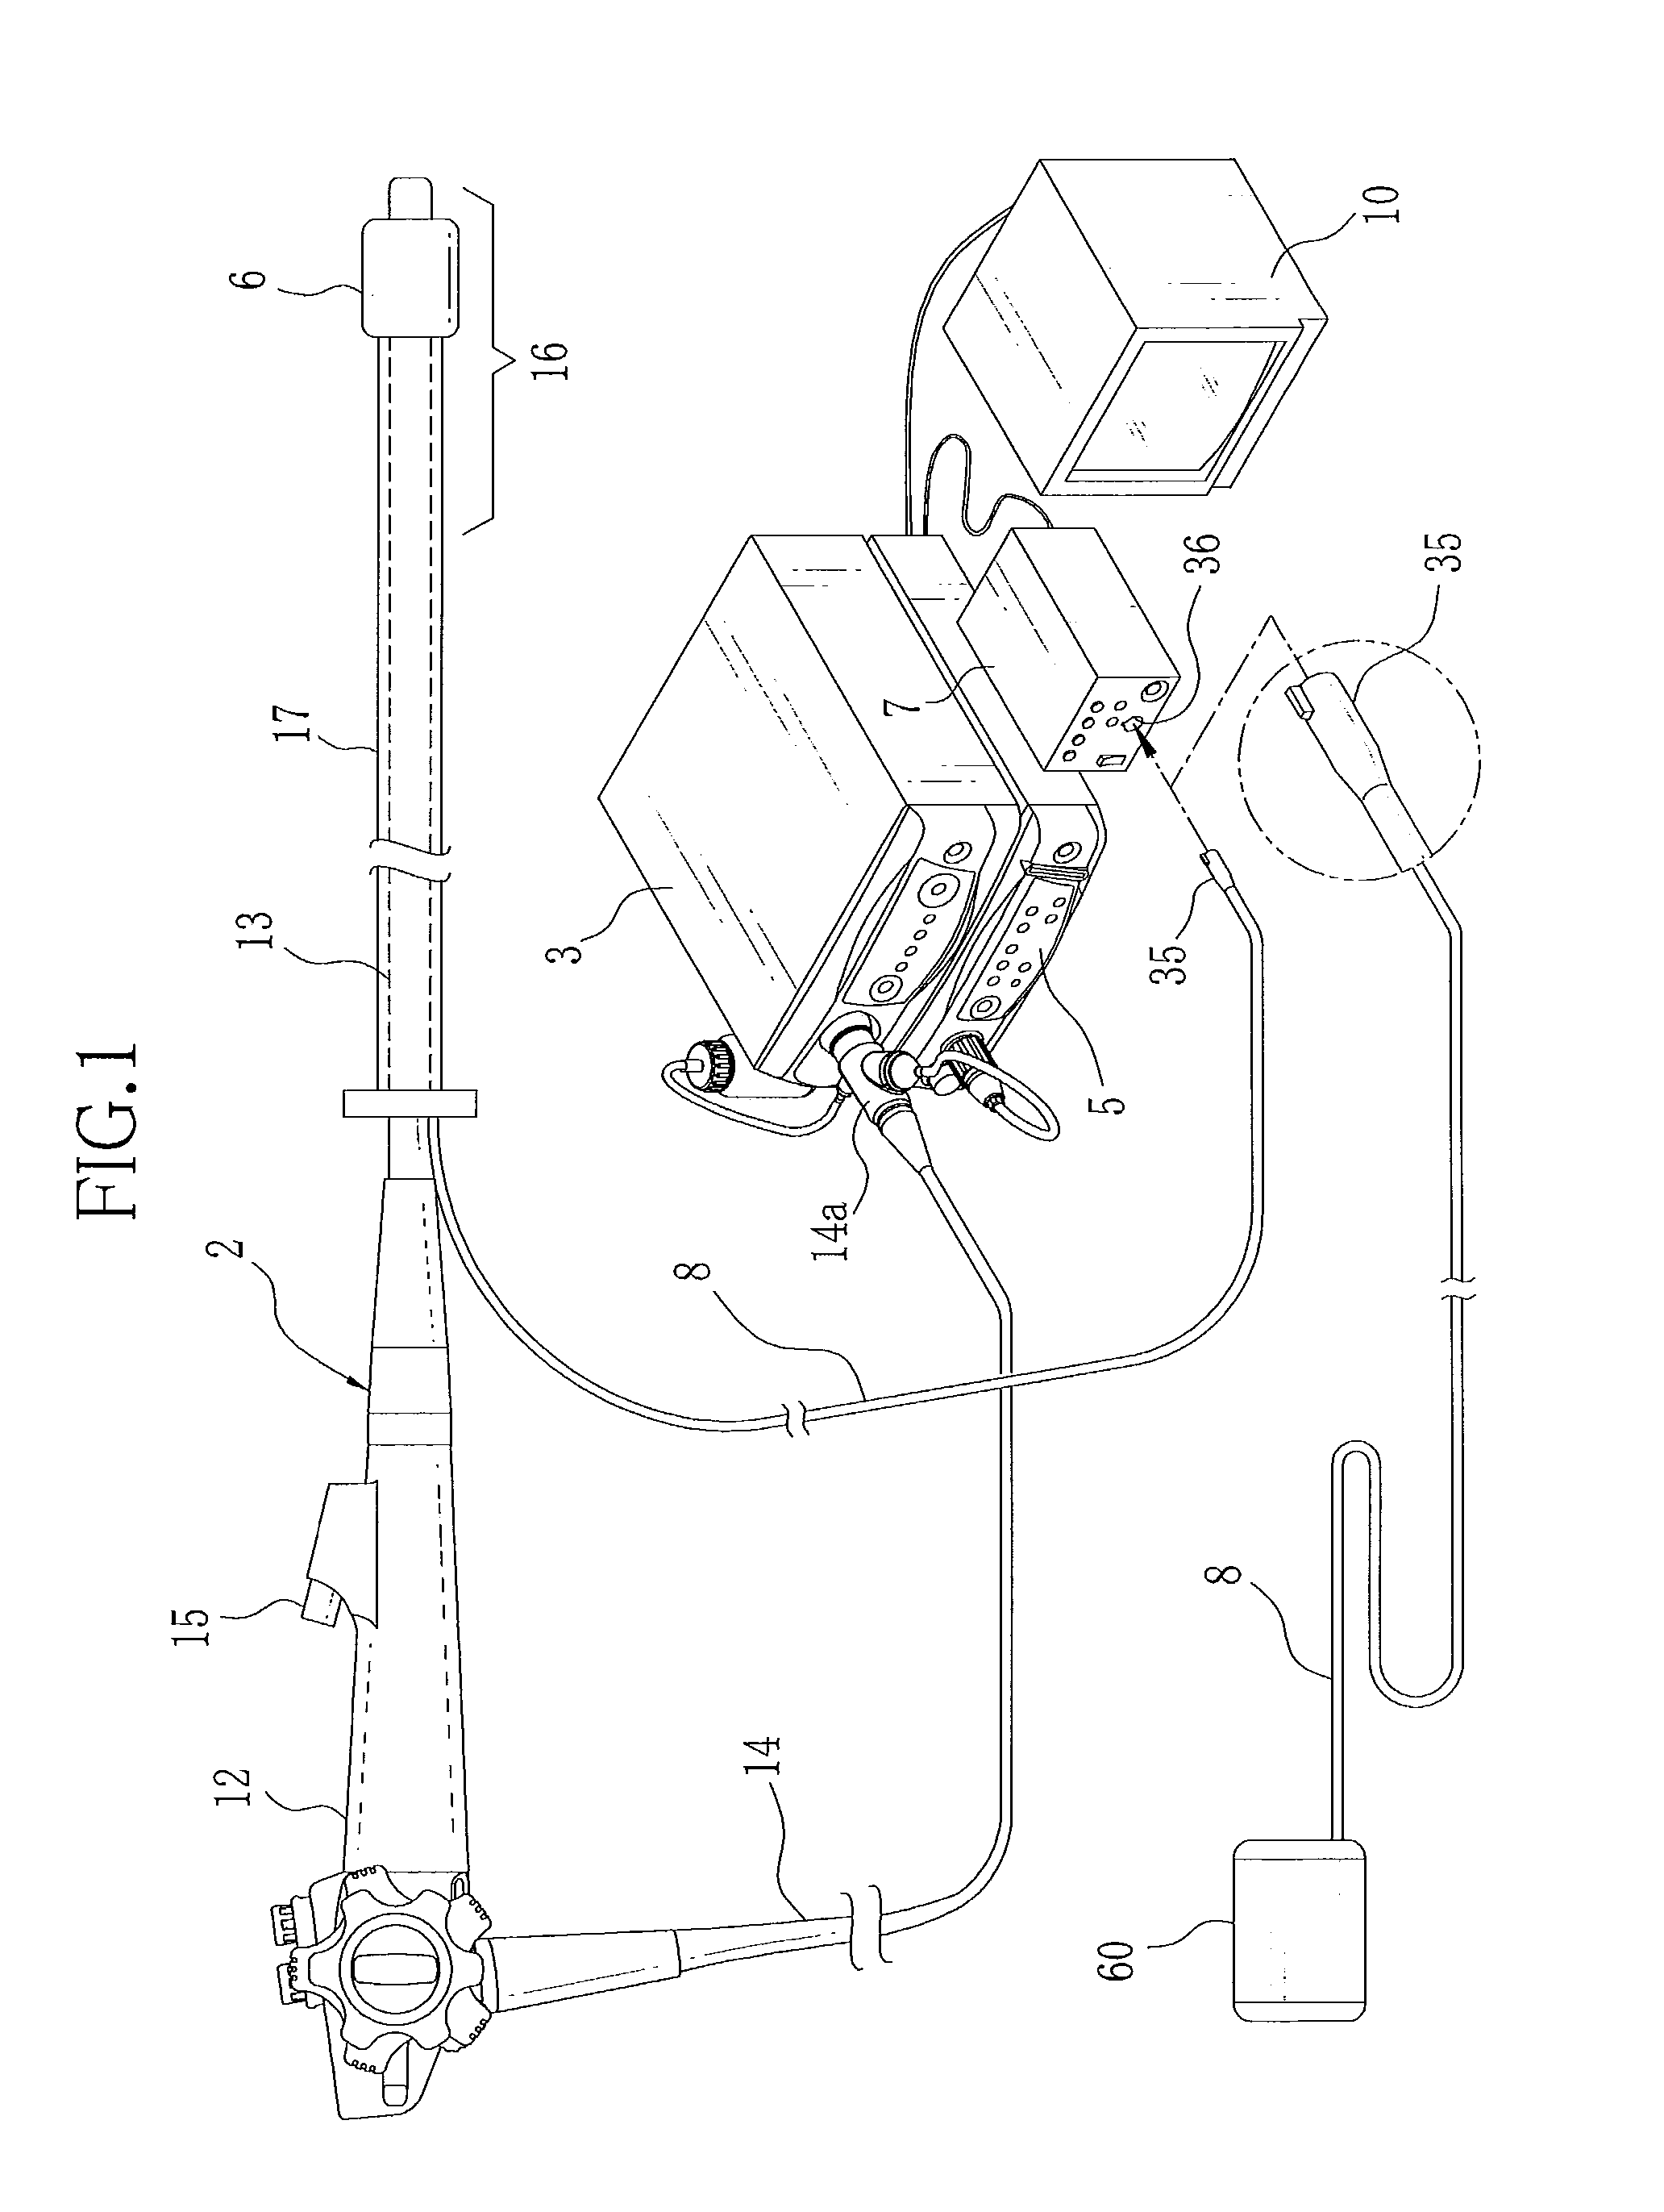 Insertion and extraction assisting device and endoscope system